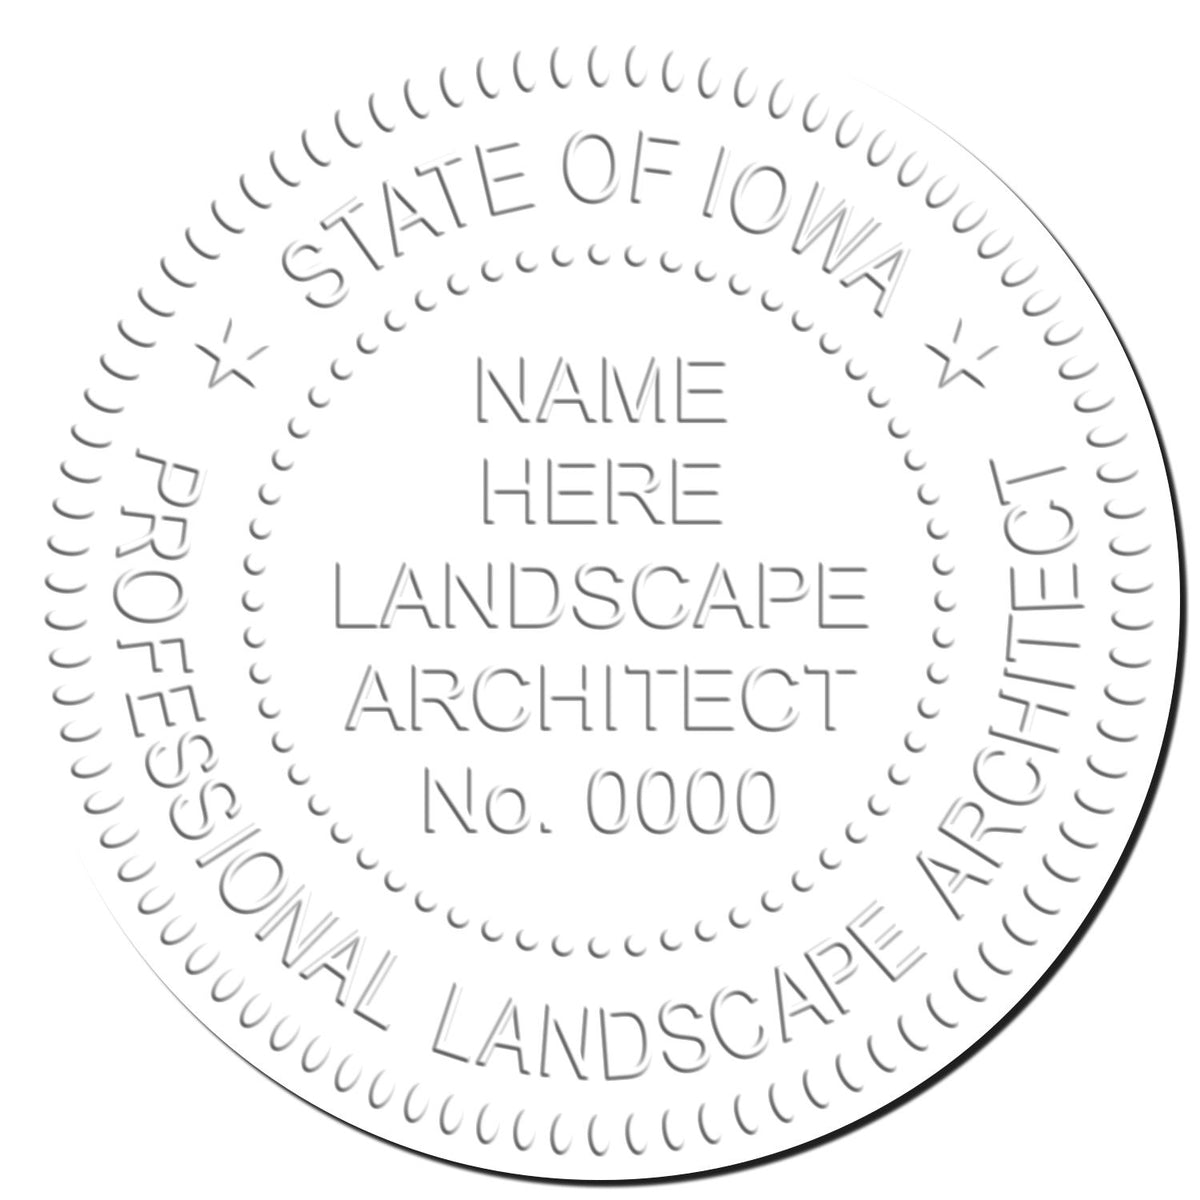 This paper is stamped with a sample imprint of the Hybrid Iowa Landscape Architect Seal, signifying its quality and reliability.